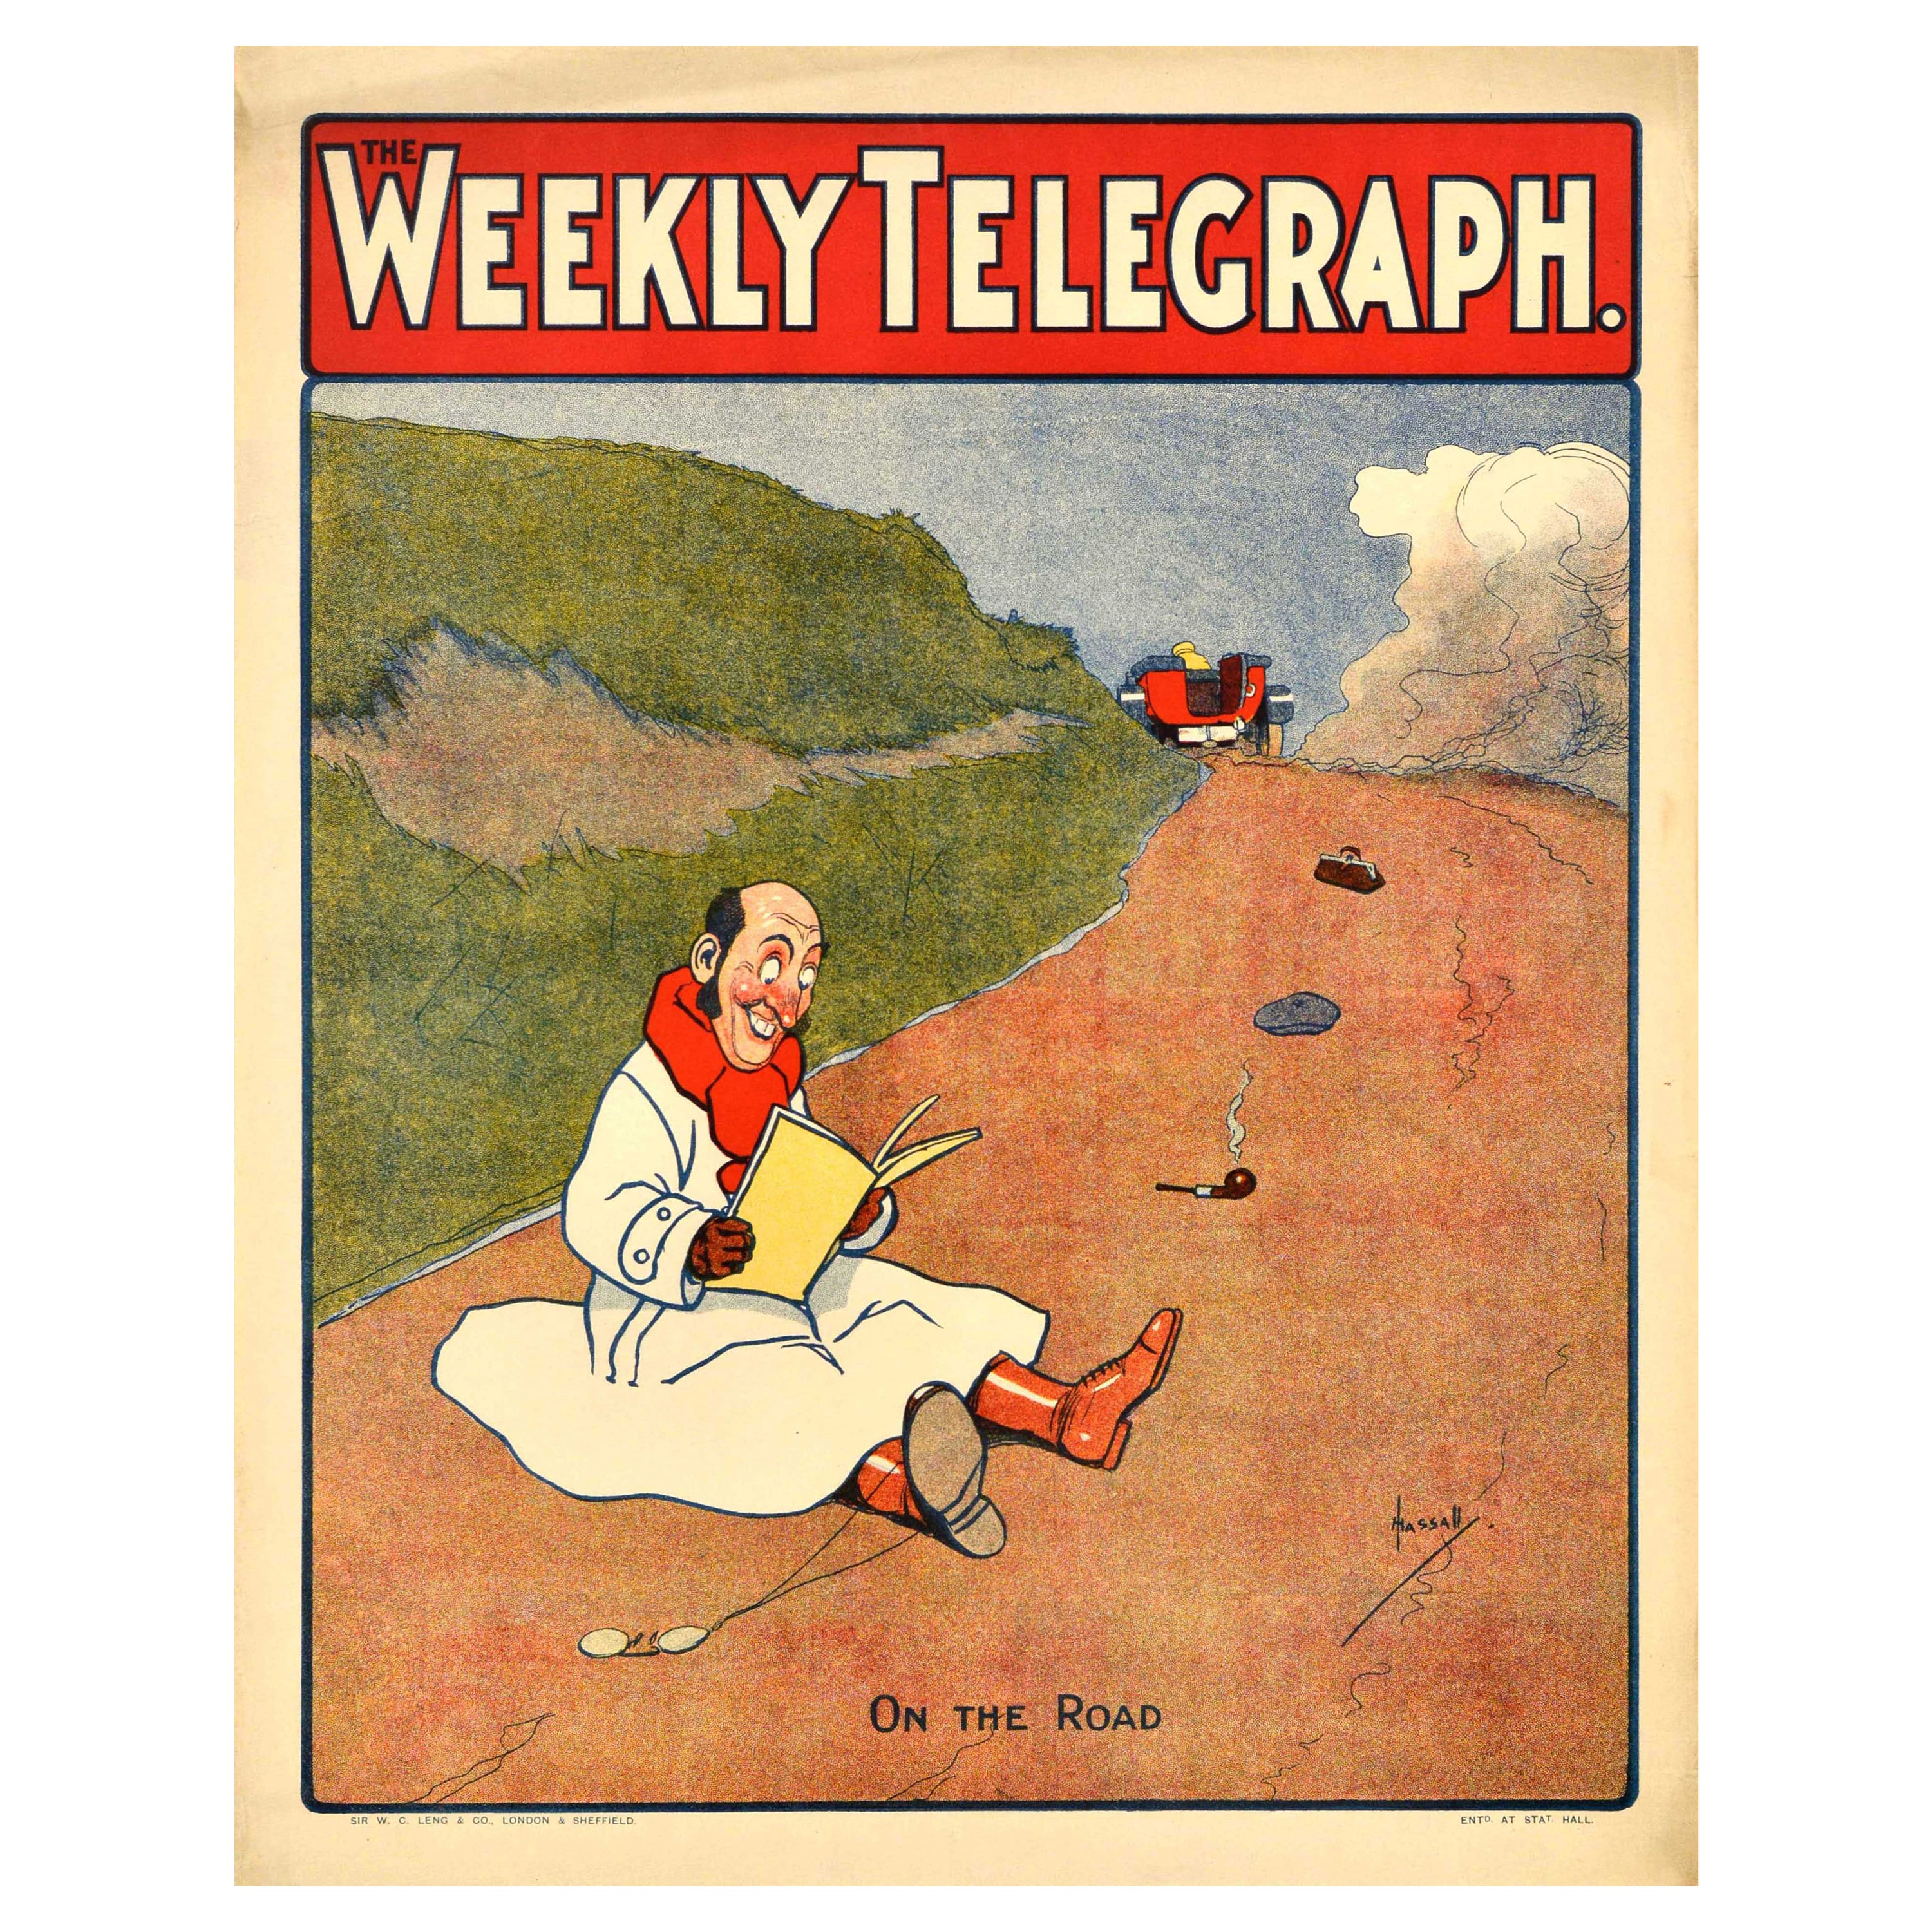 Original Antique Newspaper Advertising Poster The Weekly Telegraph On The Road For Sale